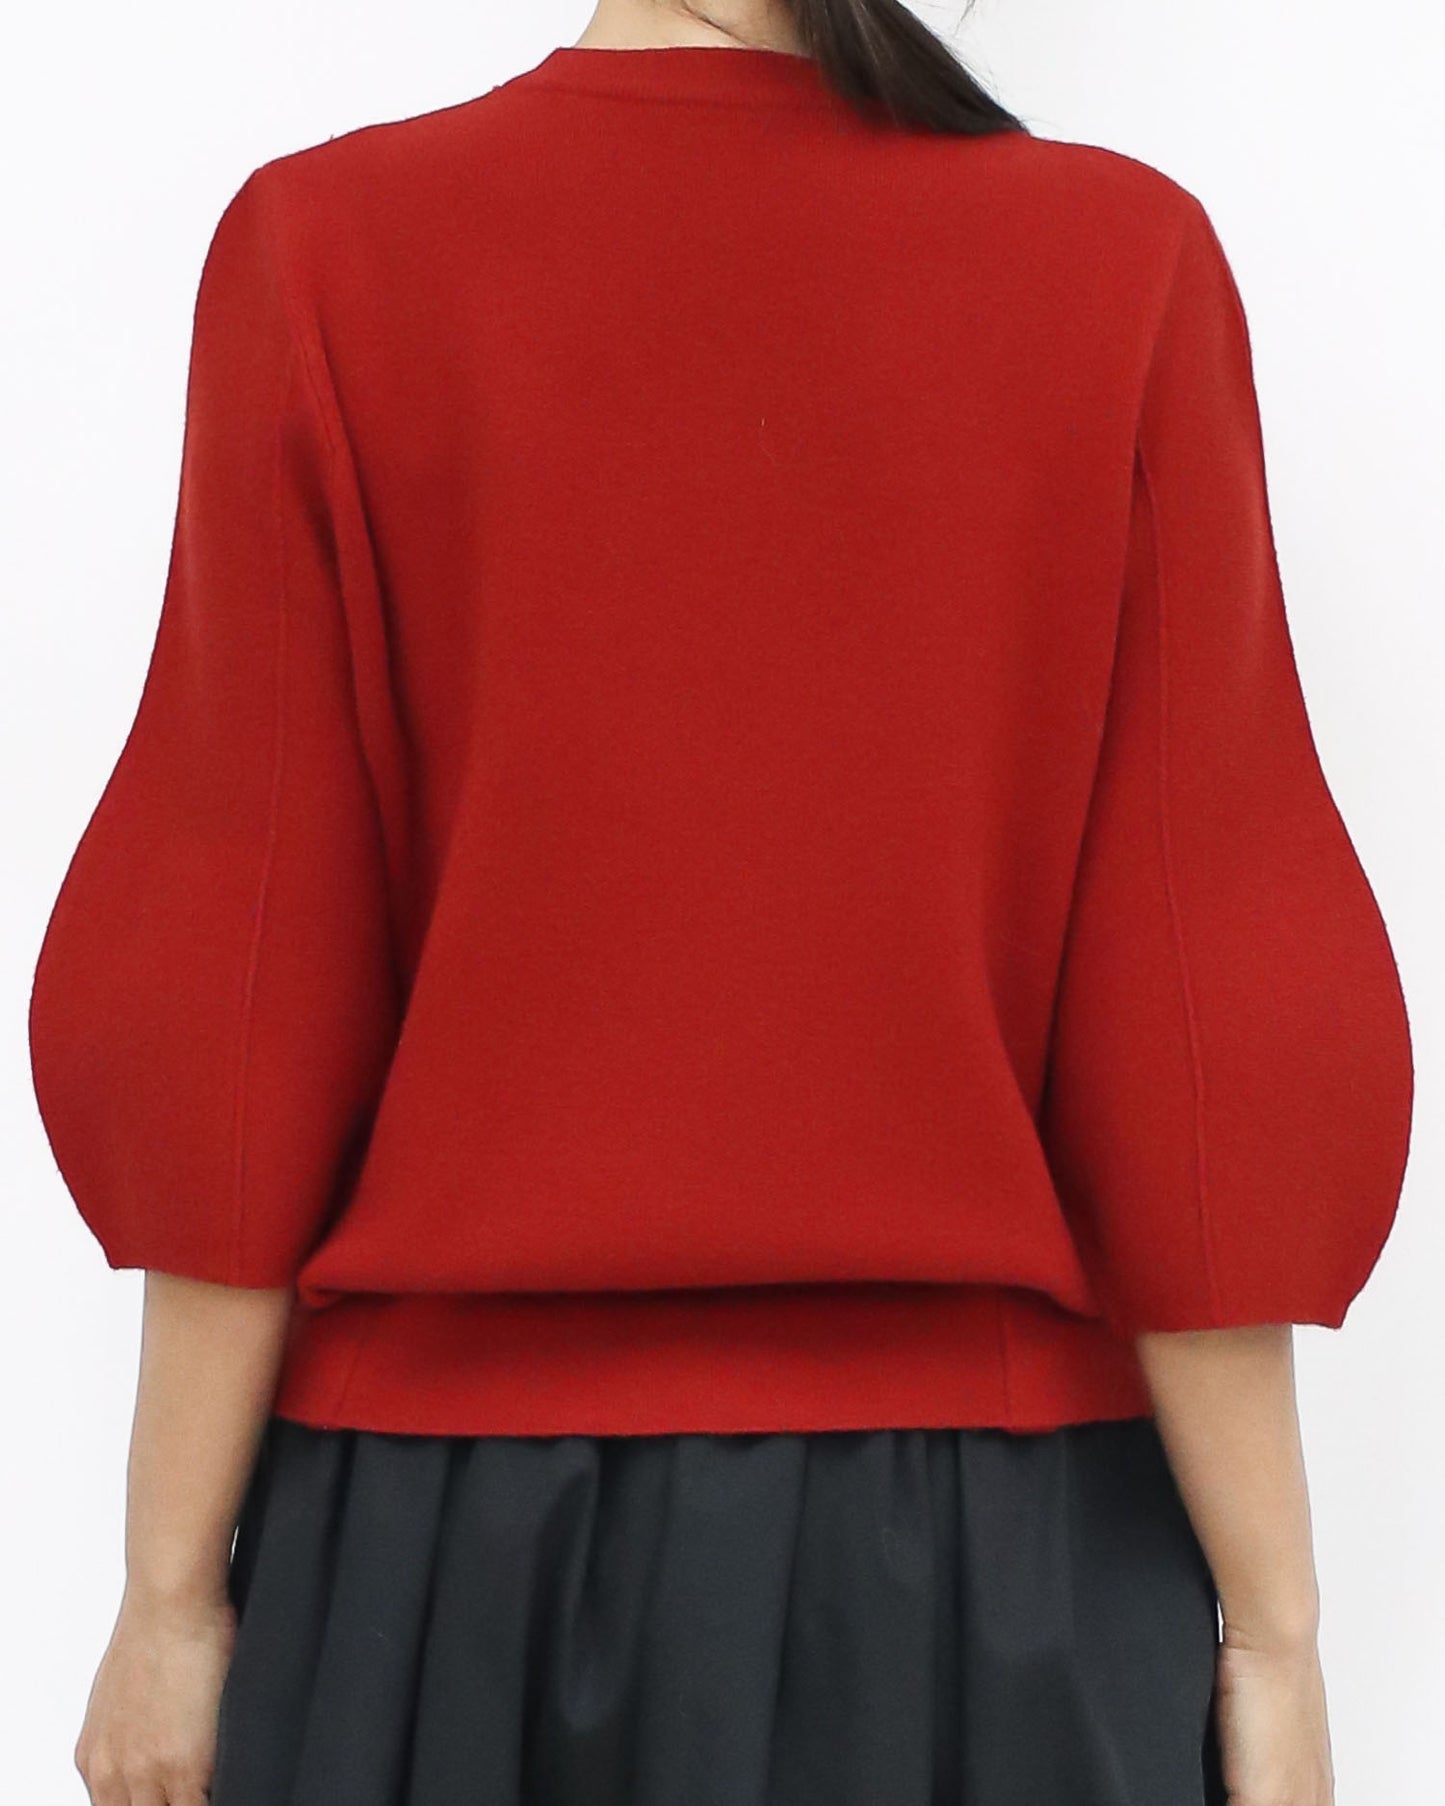 red balloon sleeves knitted top